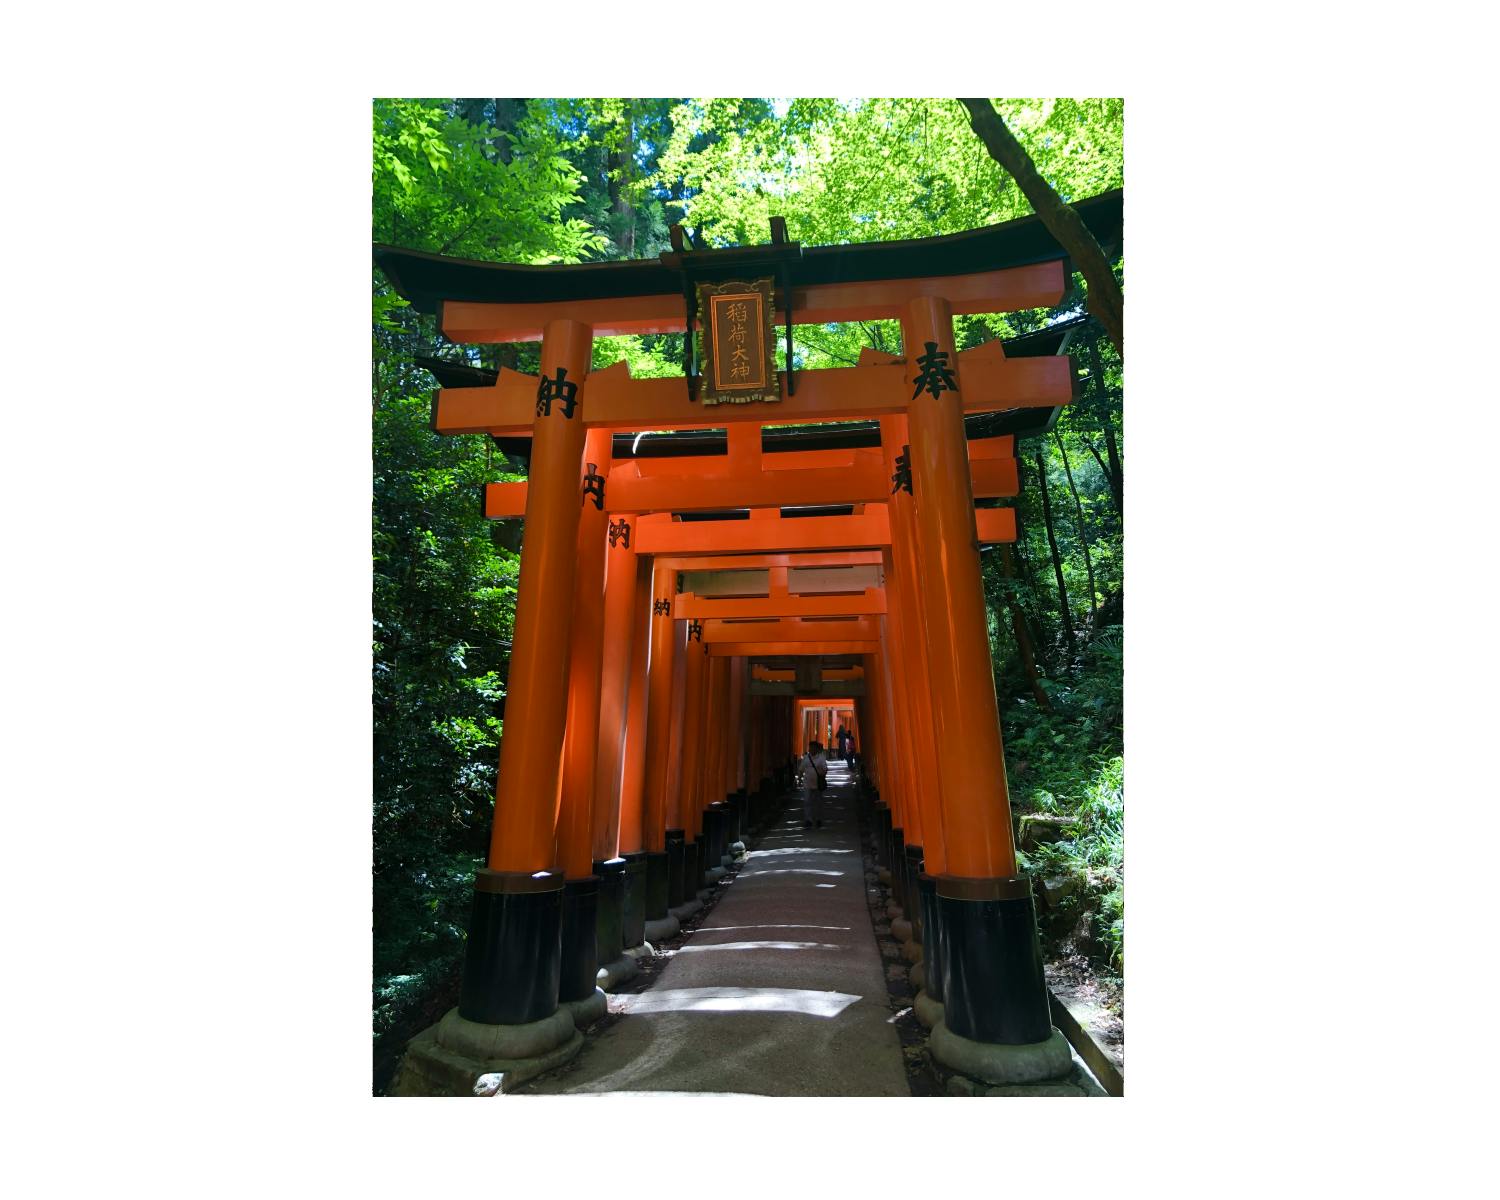 KyotoFushimi Inari Shrine - Shimaya eConcierge team weaves destinations like this into a customised itinerary for its guests